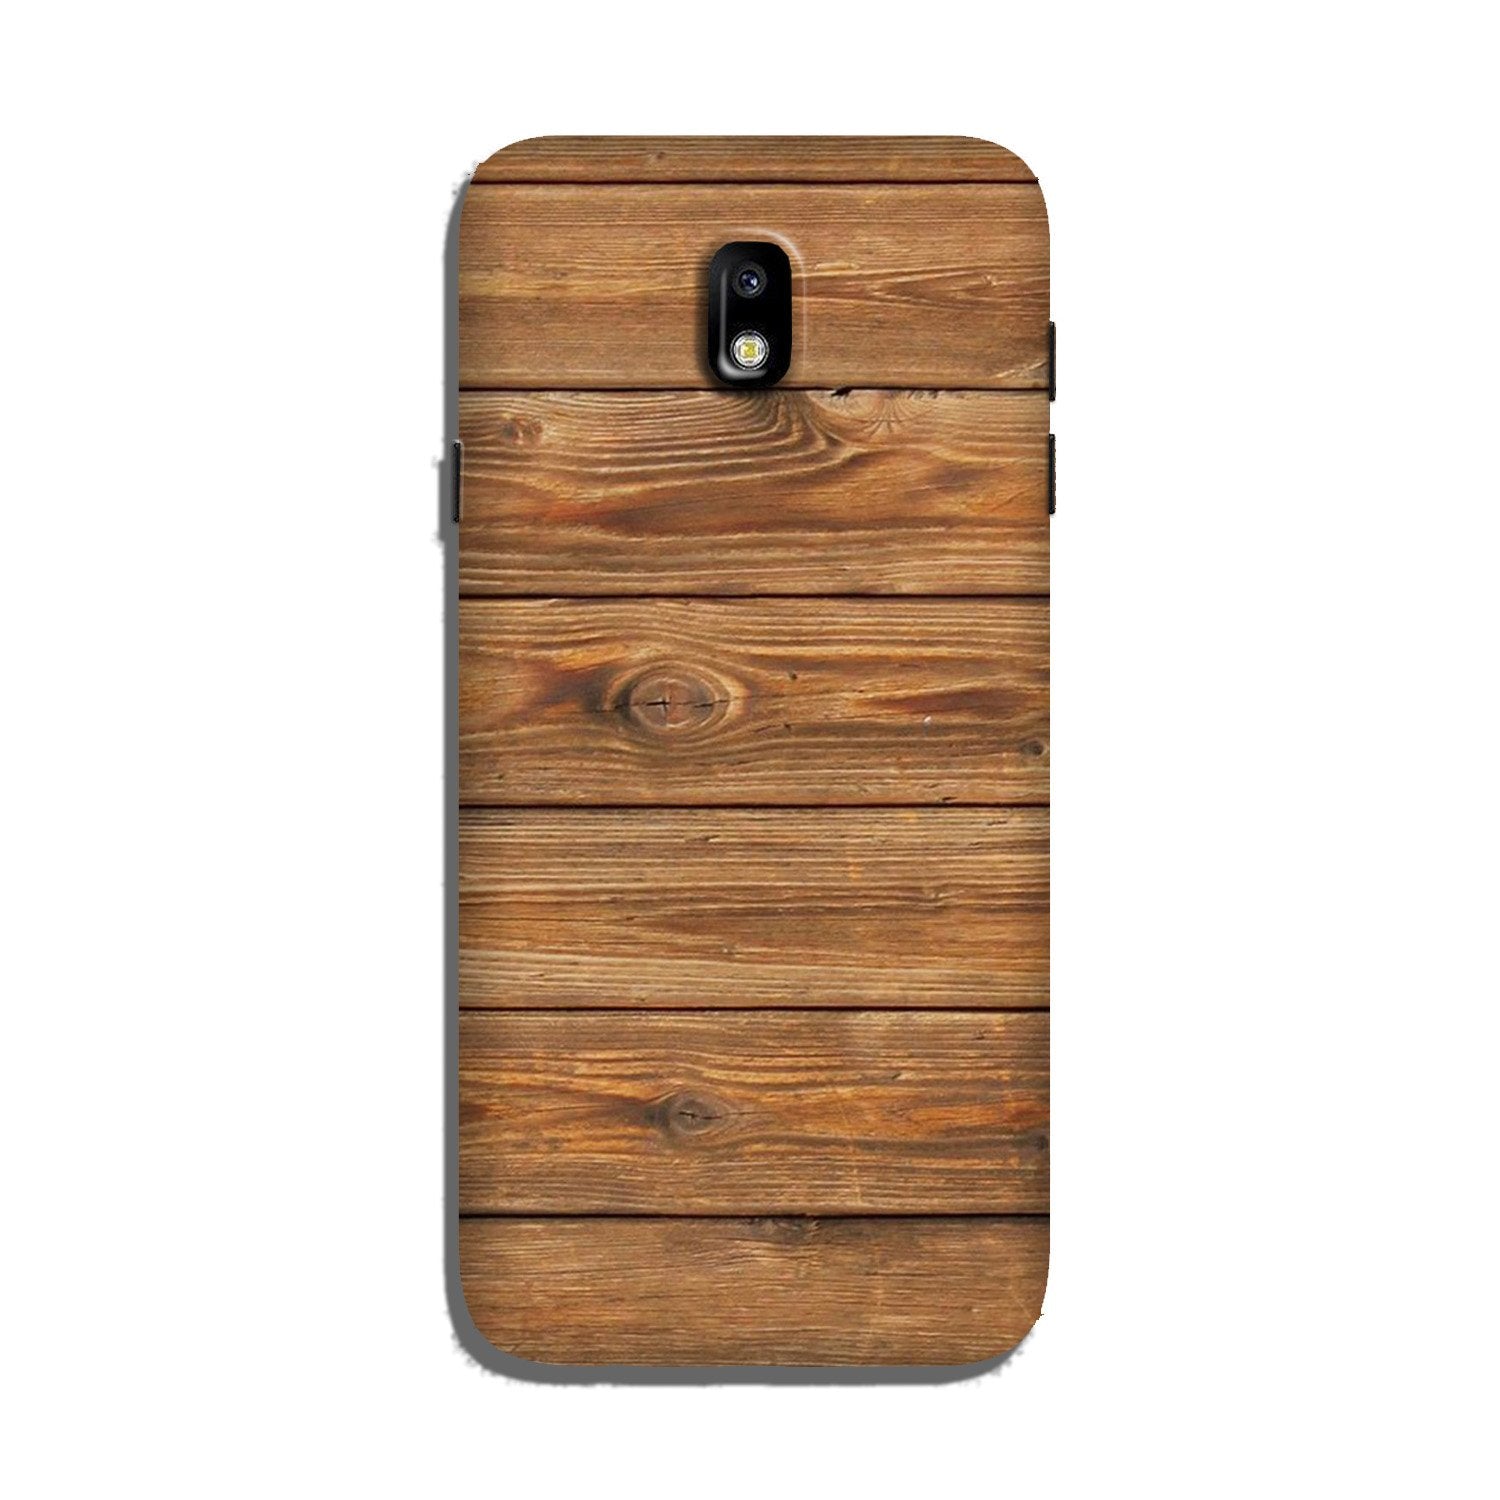 Wooden Look Case for Galaxy J7 Pro(Design - 113)